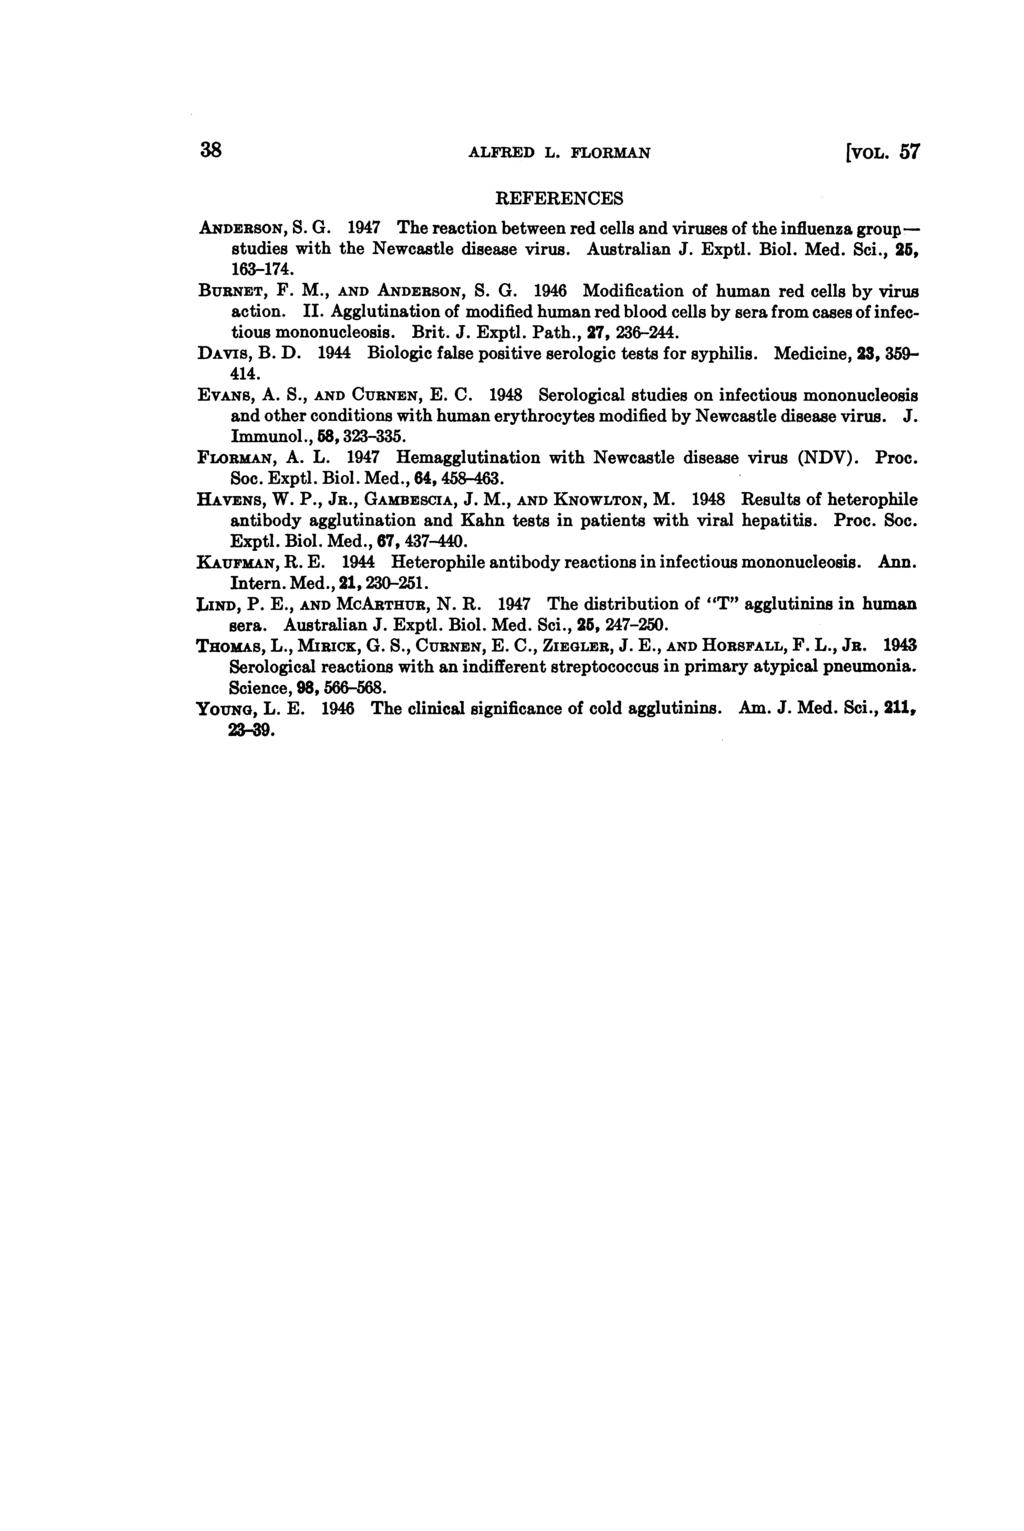 38 ALFRED L. FLORMAN [VOL. 57 REFERENCES ANDERSON, S. G. 1947 The reaction between red cells and viruses of the influenza groupstudies with the Newcastle disease virus. Australian J. Exptl. Biol. Med.